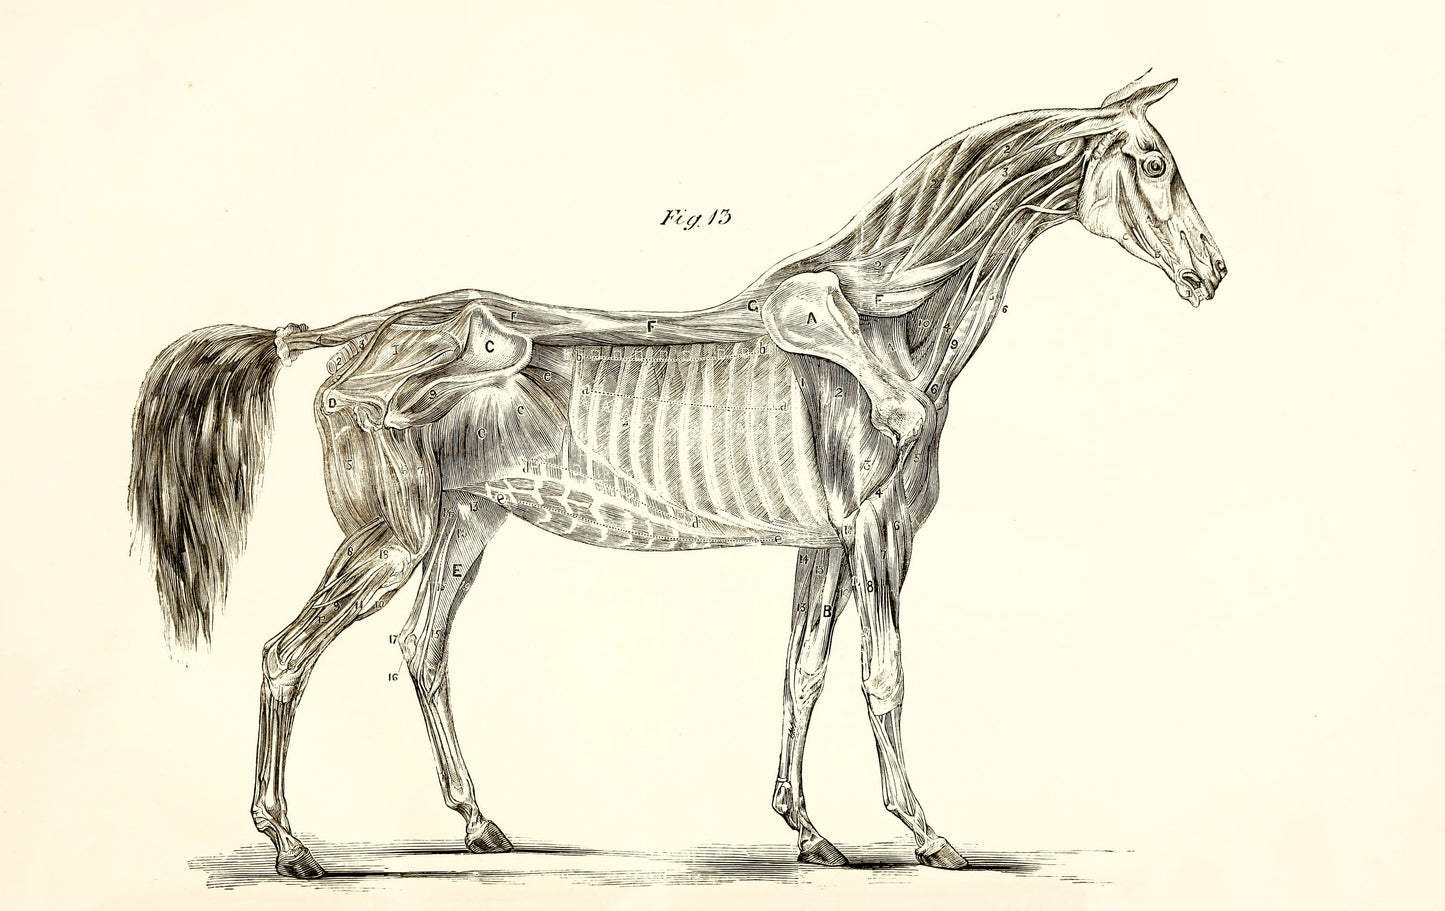 The Anatomy & Physiology of the Horse [20 Images]